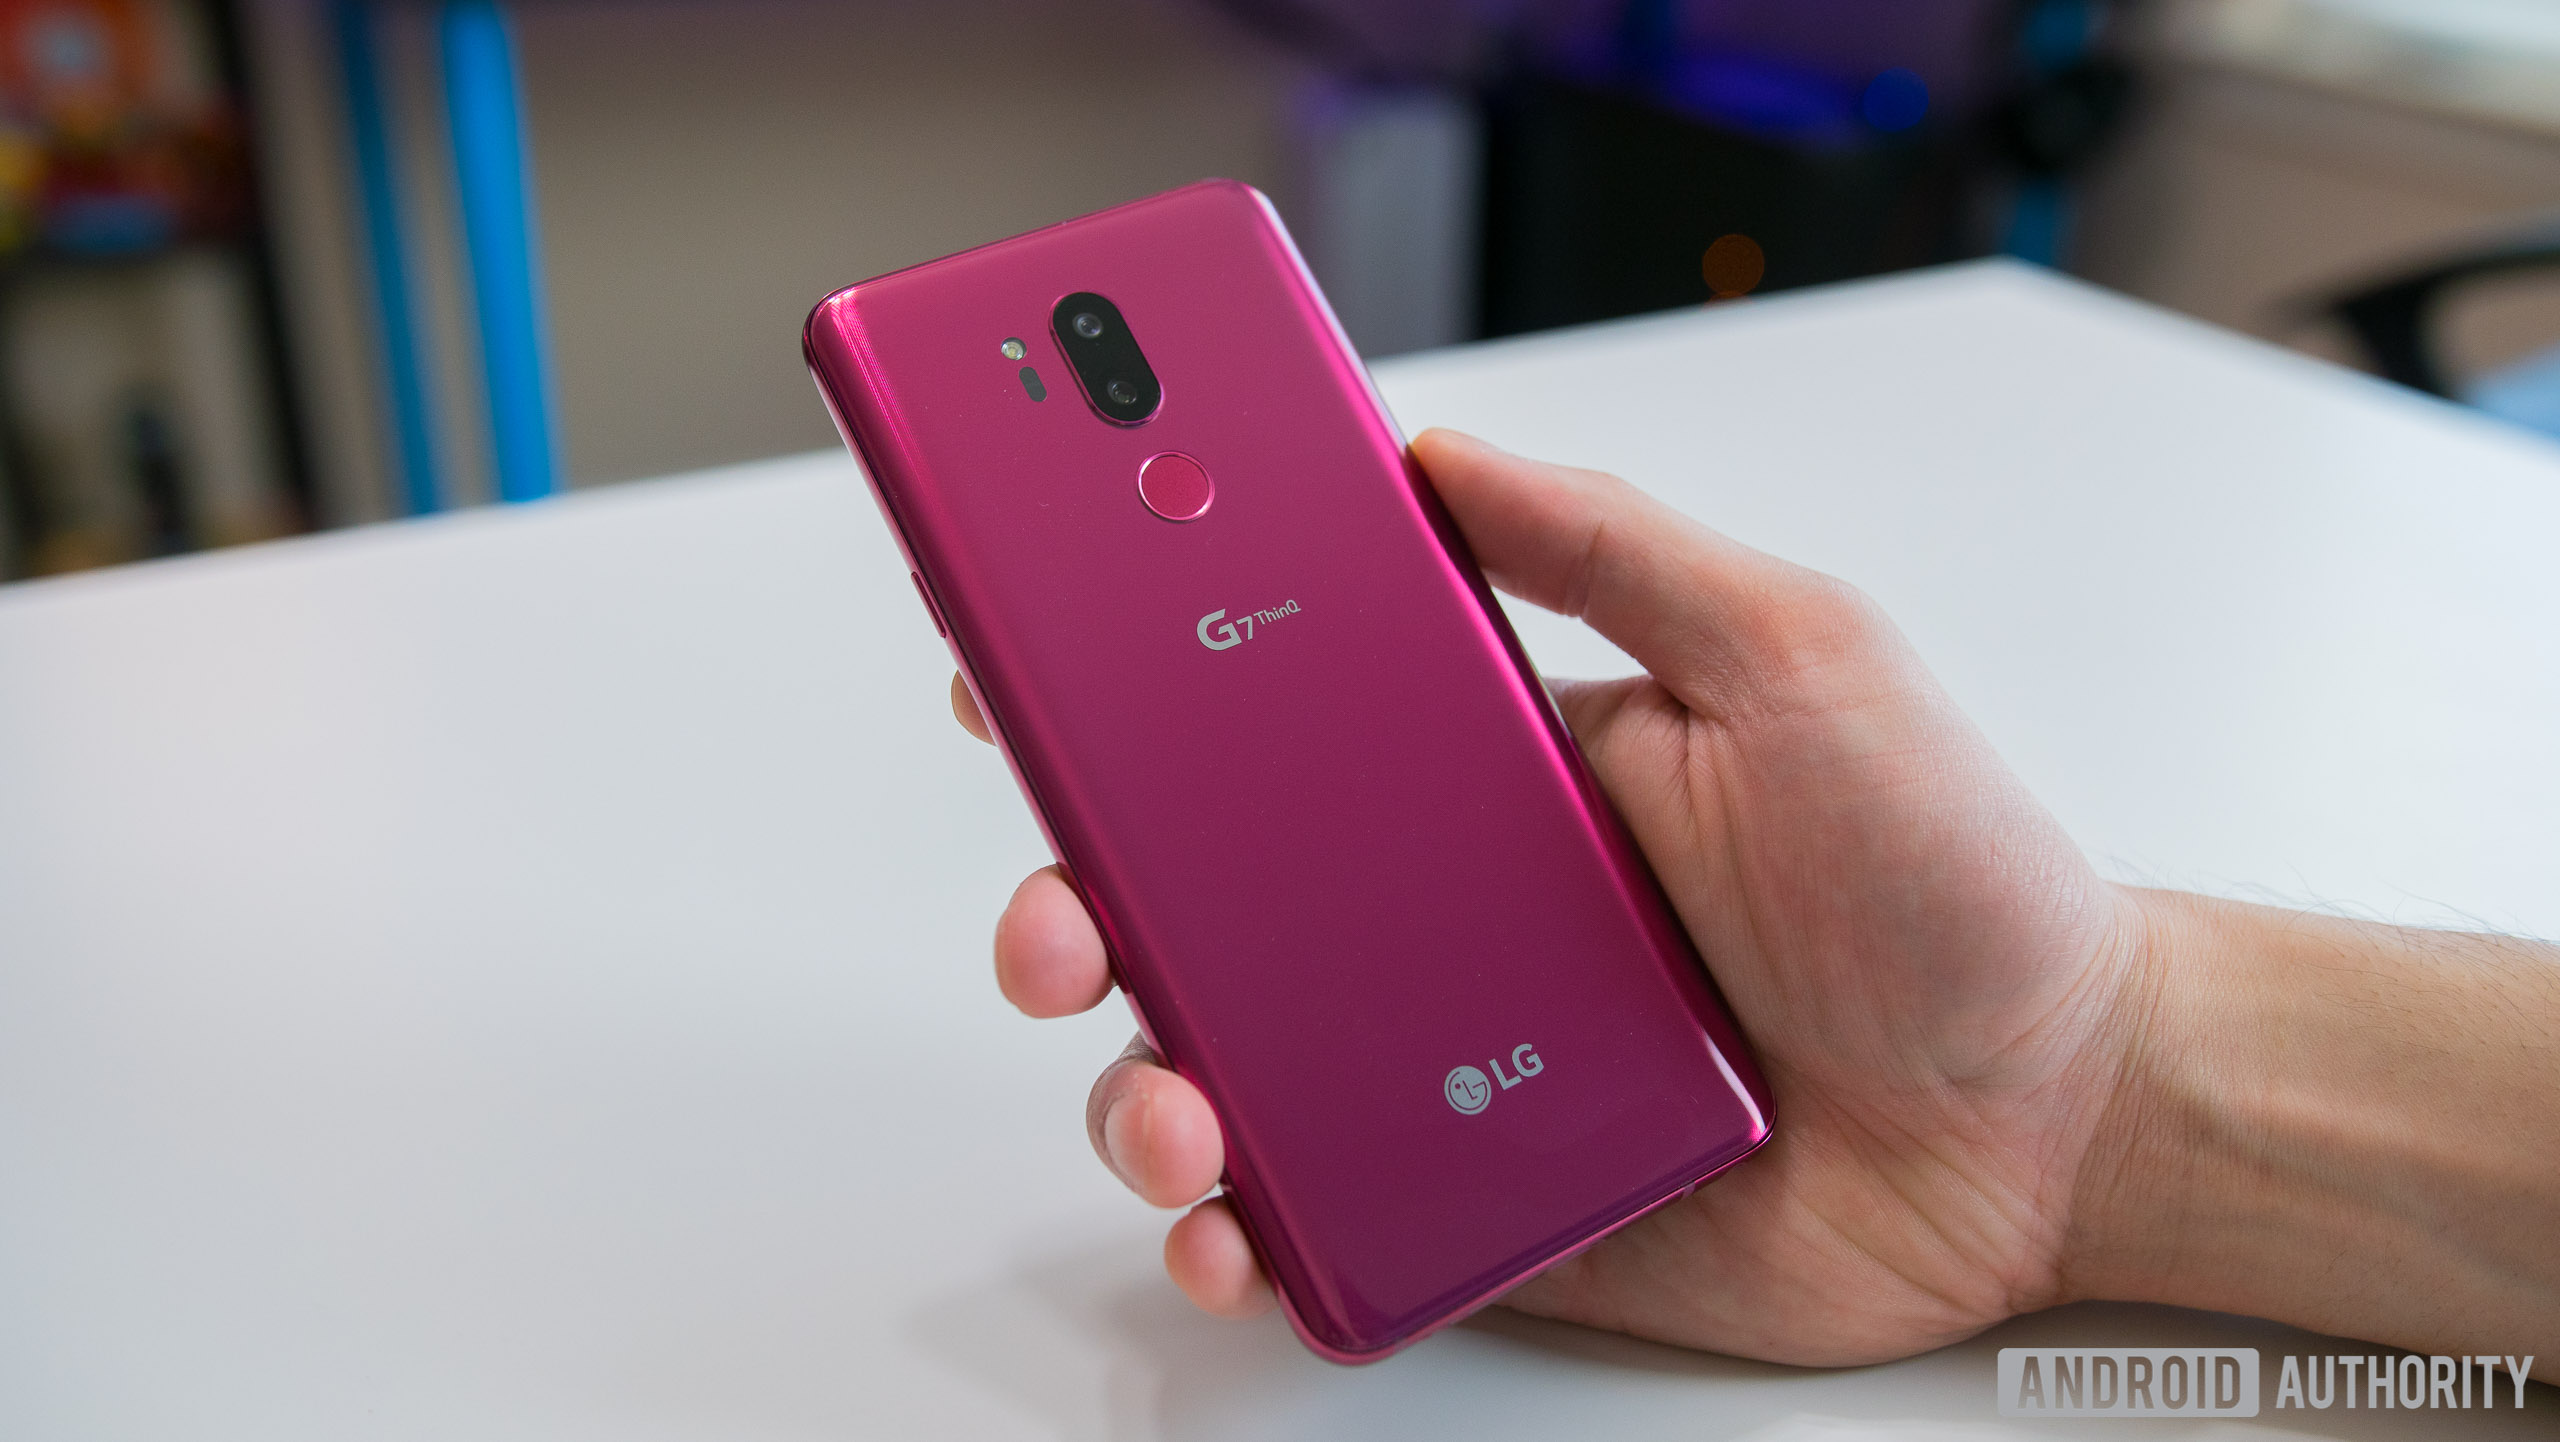 LG G7 ThinQ in hand showing the back